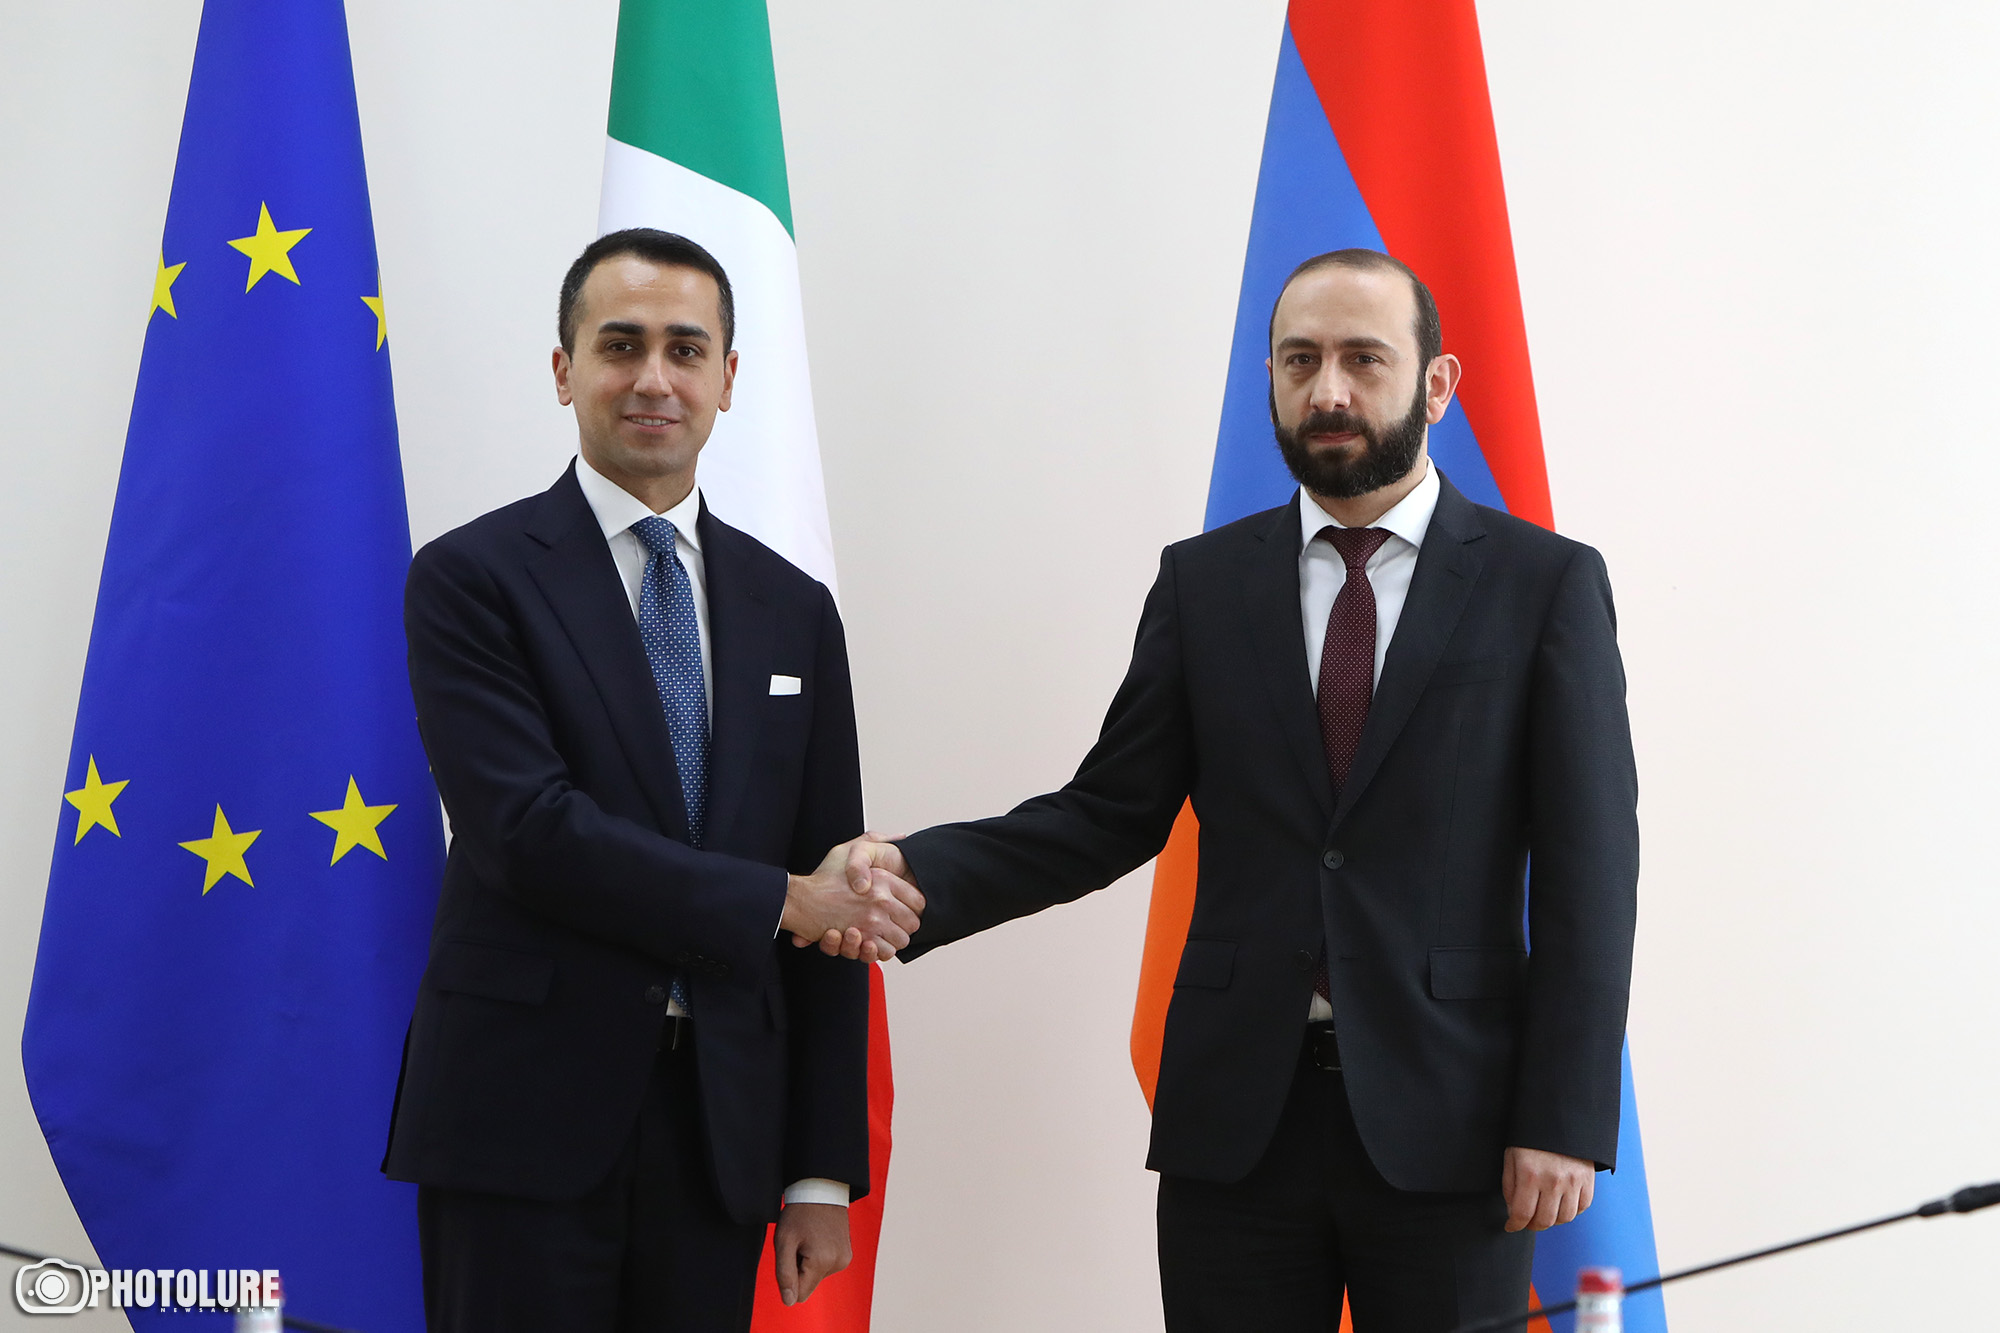 Italian foreign minister says Karabakh conflict should be settled through the OSCE Minsk Group